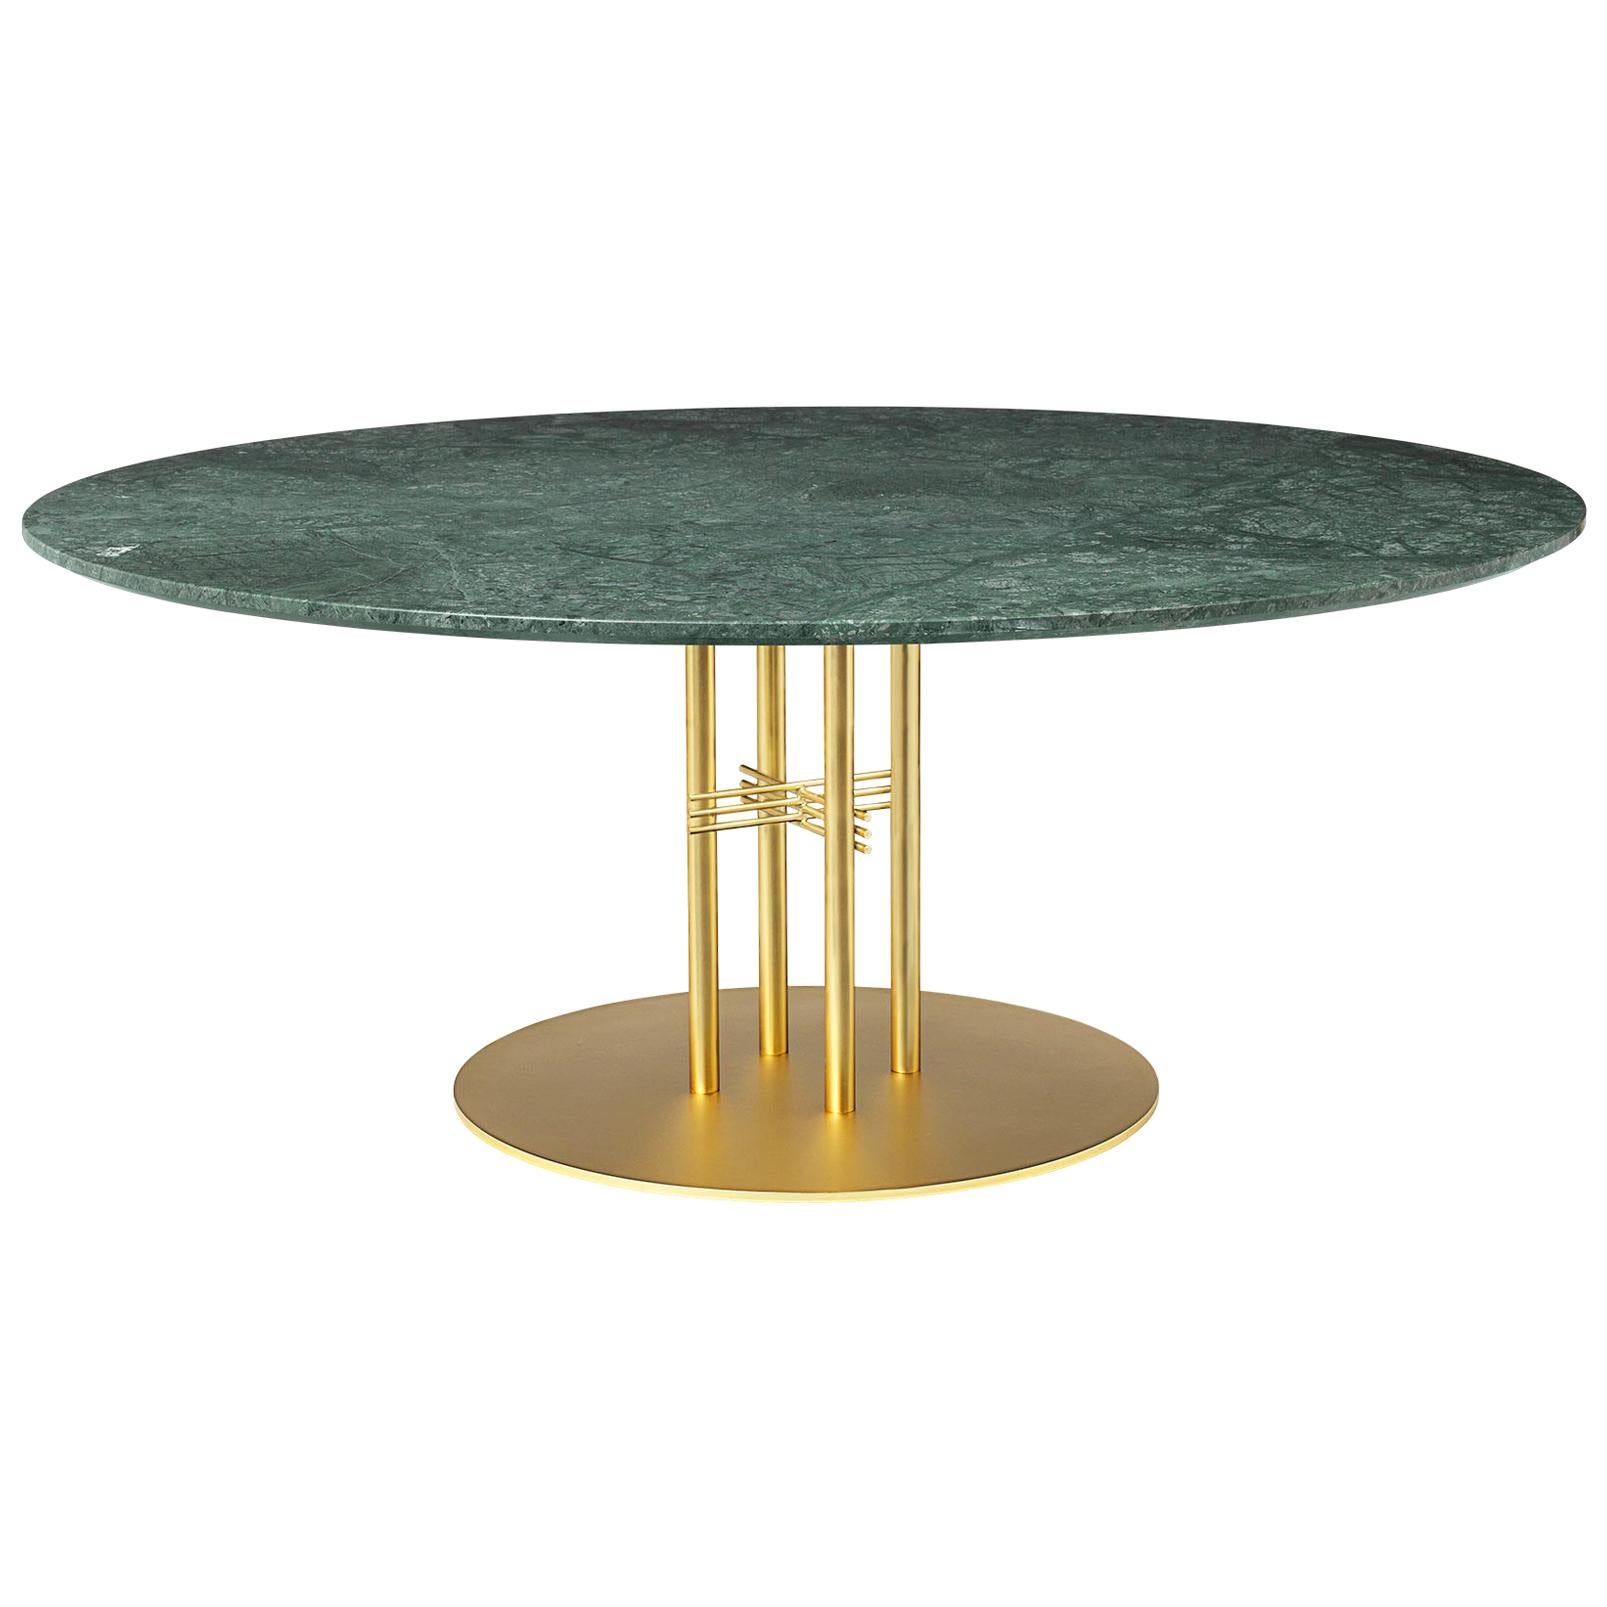 TS Column Lounge Table, Round, Brass Base, X-Large, Marble